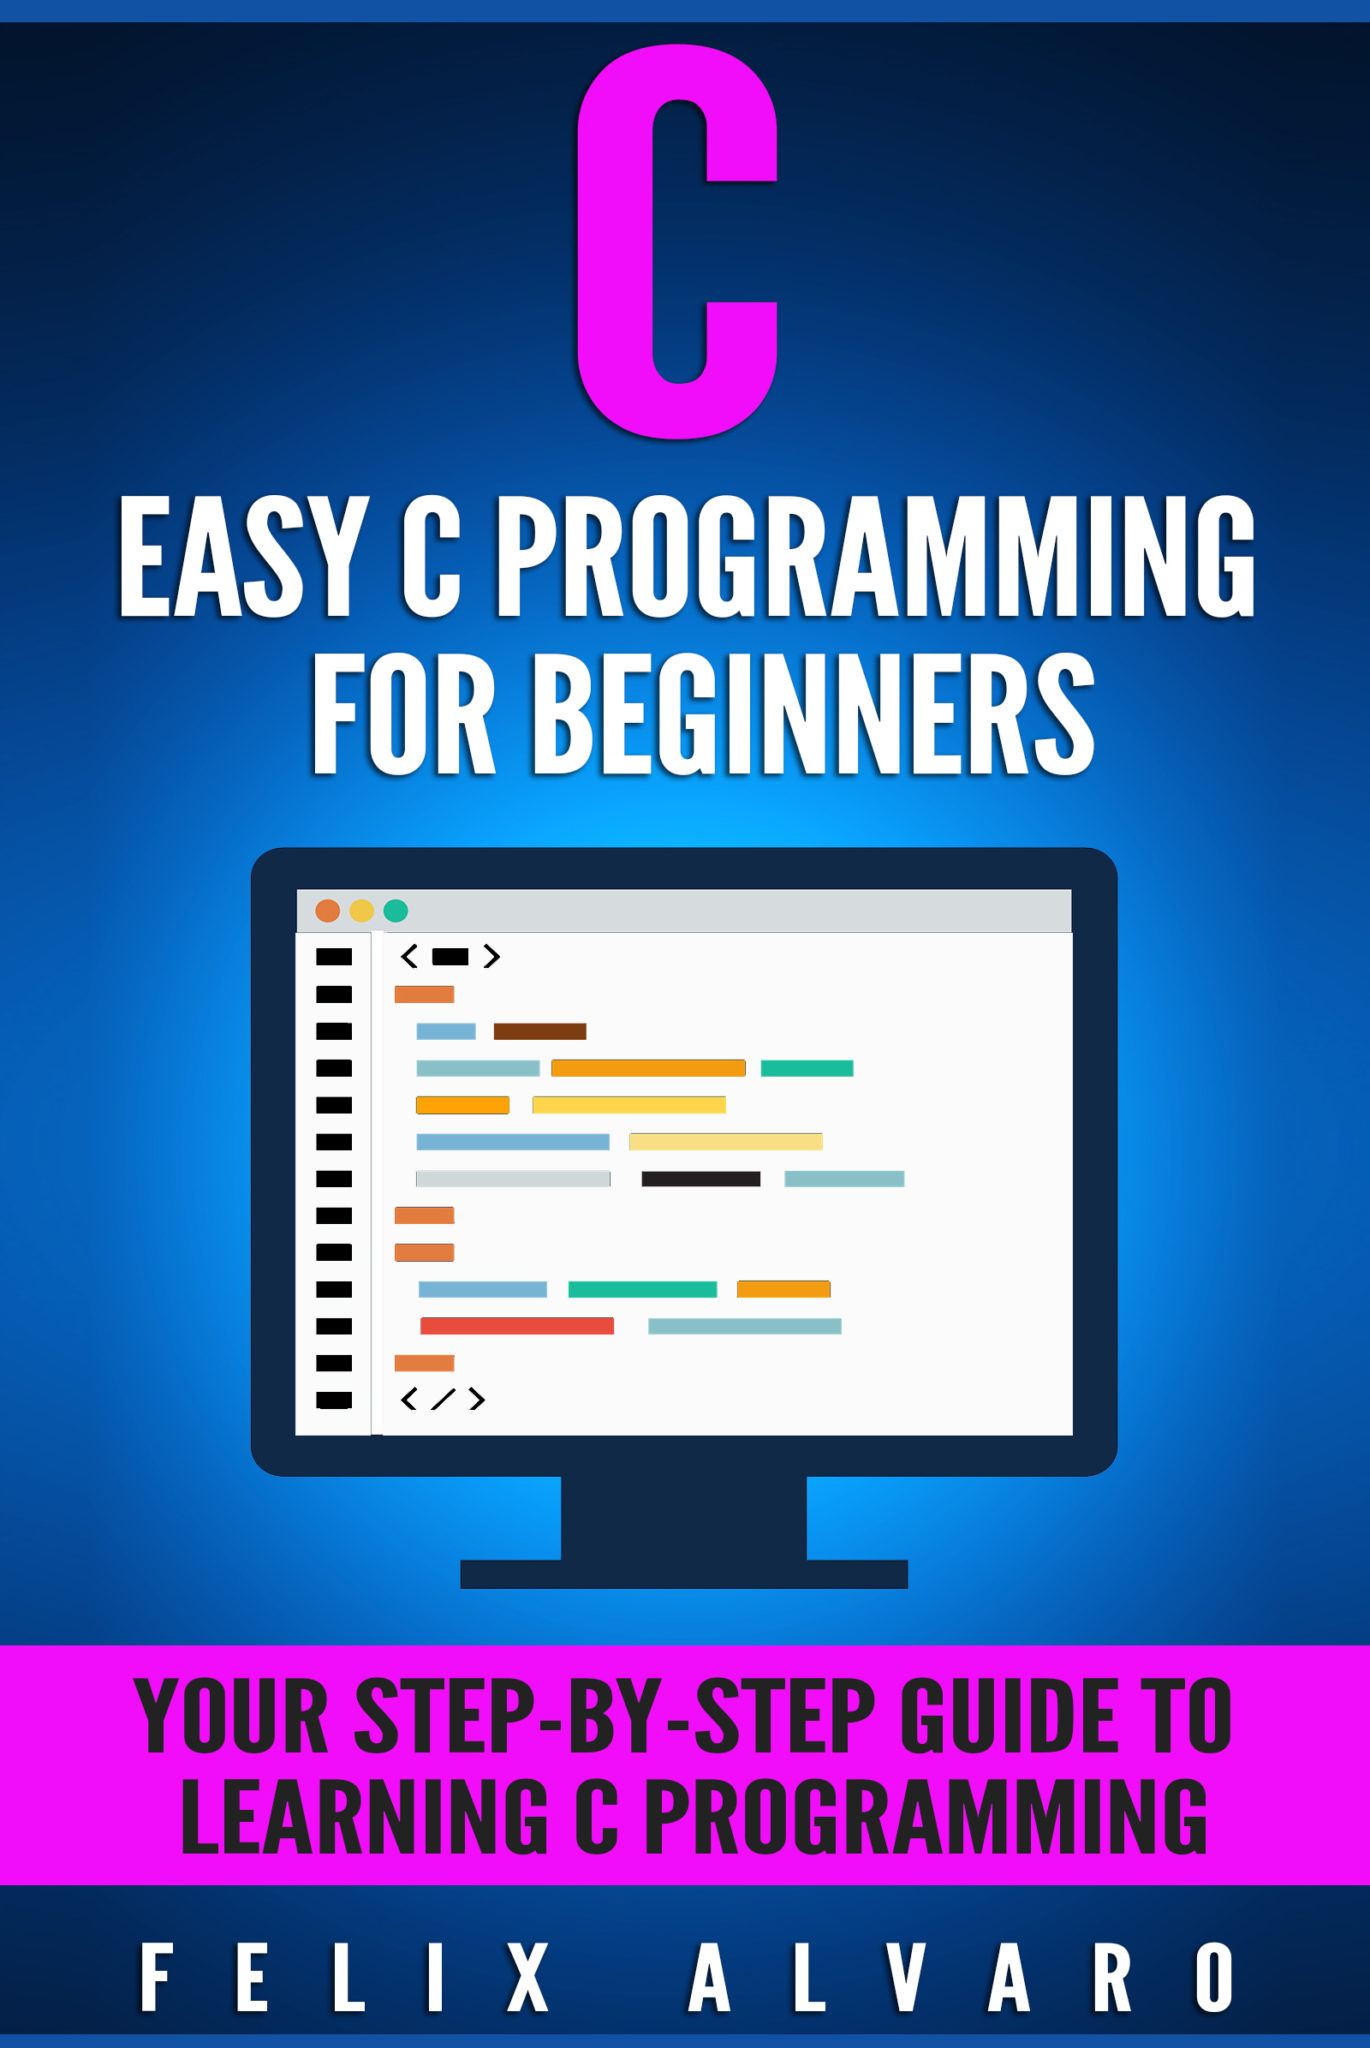 FREE: C: Easy C Programming for Beginners, Your Step-By-Step Guide To Learning C Programming by Felix Alvaro